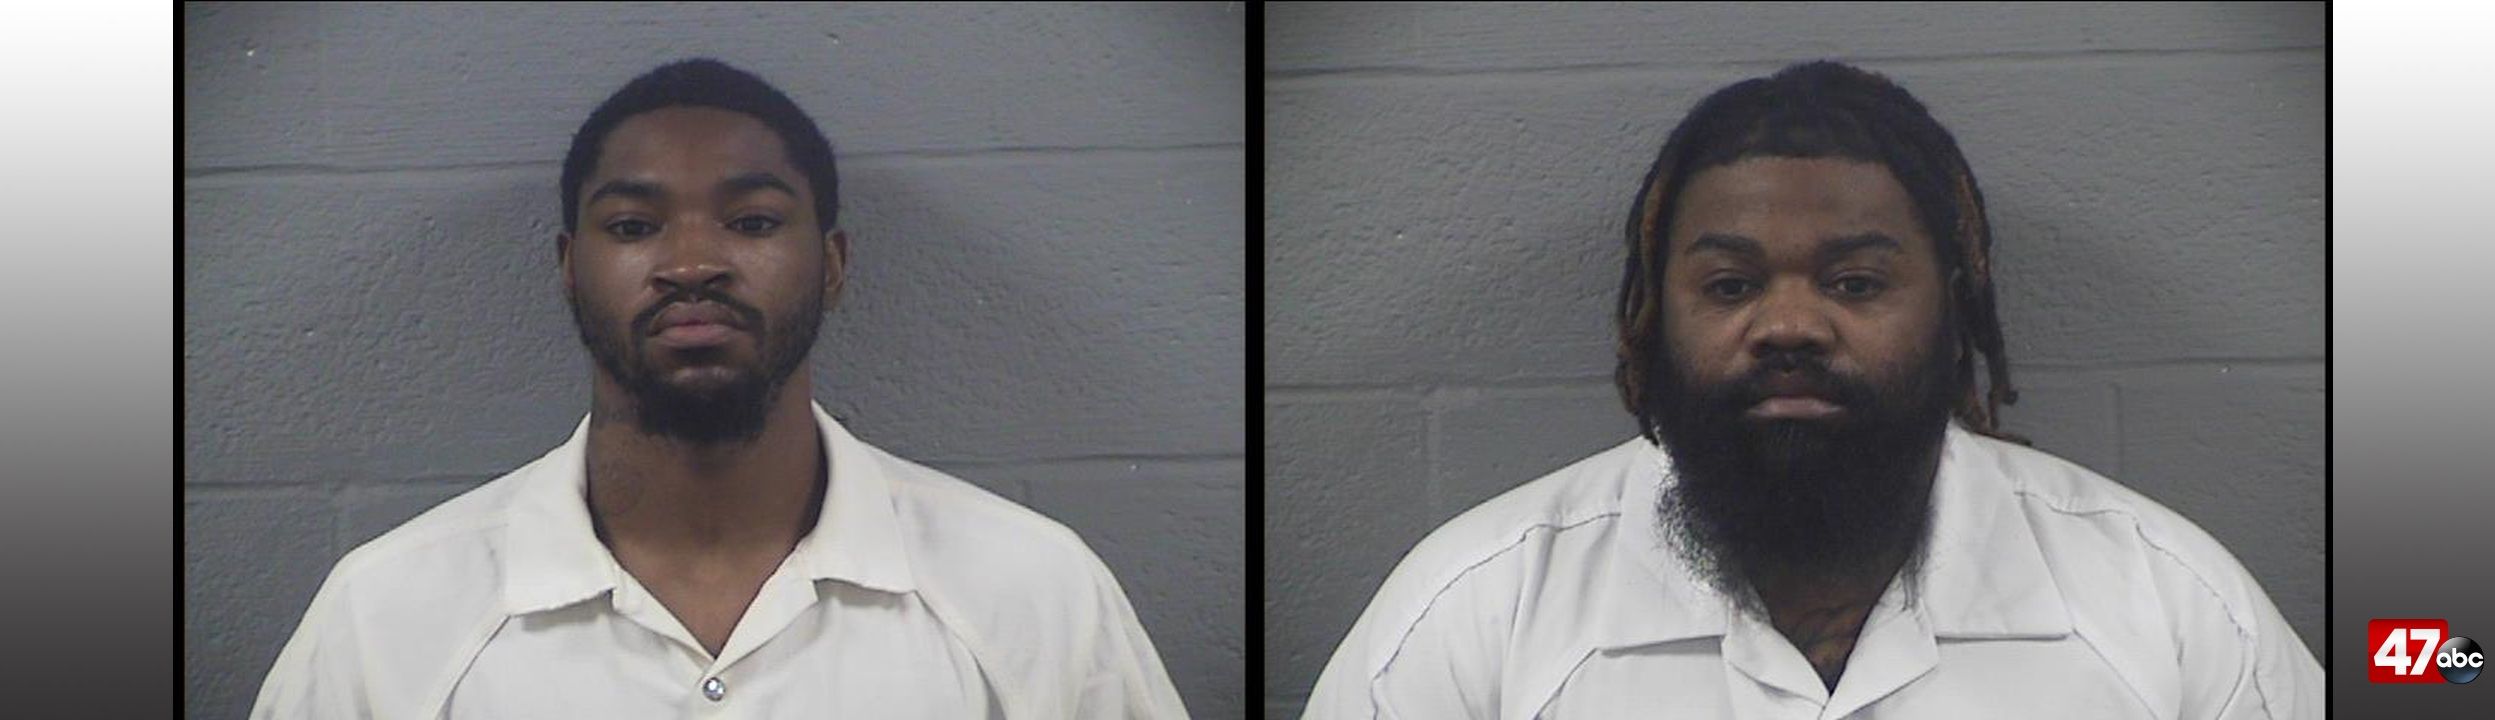 Virginia men indicted on murder charges in two separate homicides image picture image